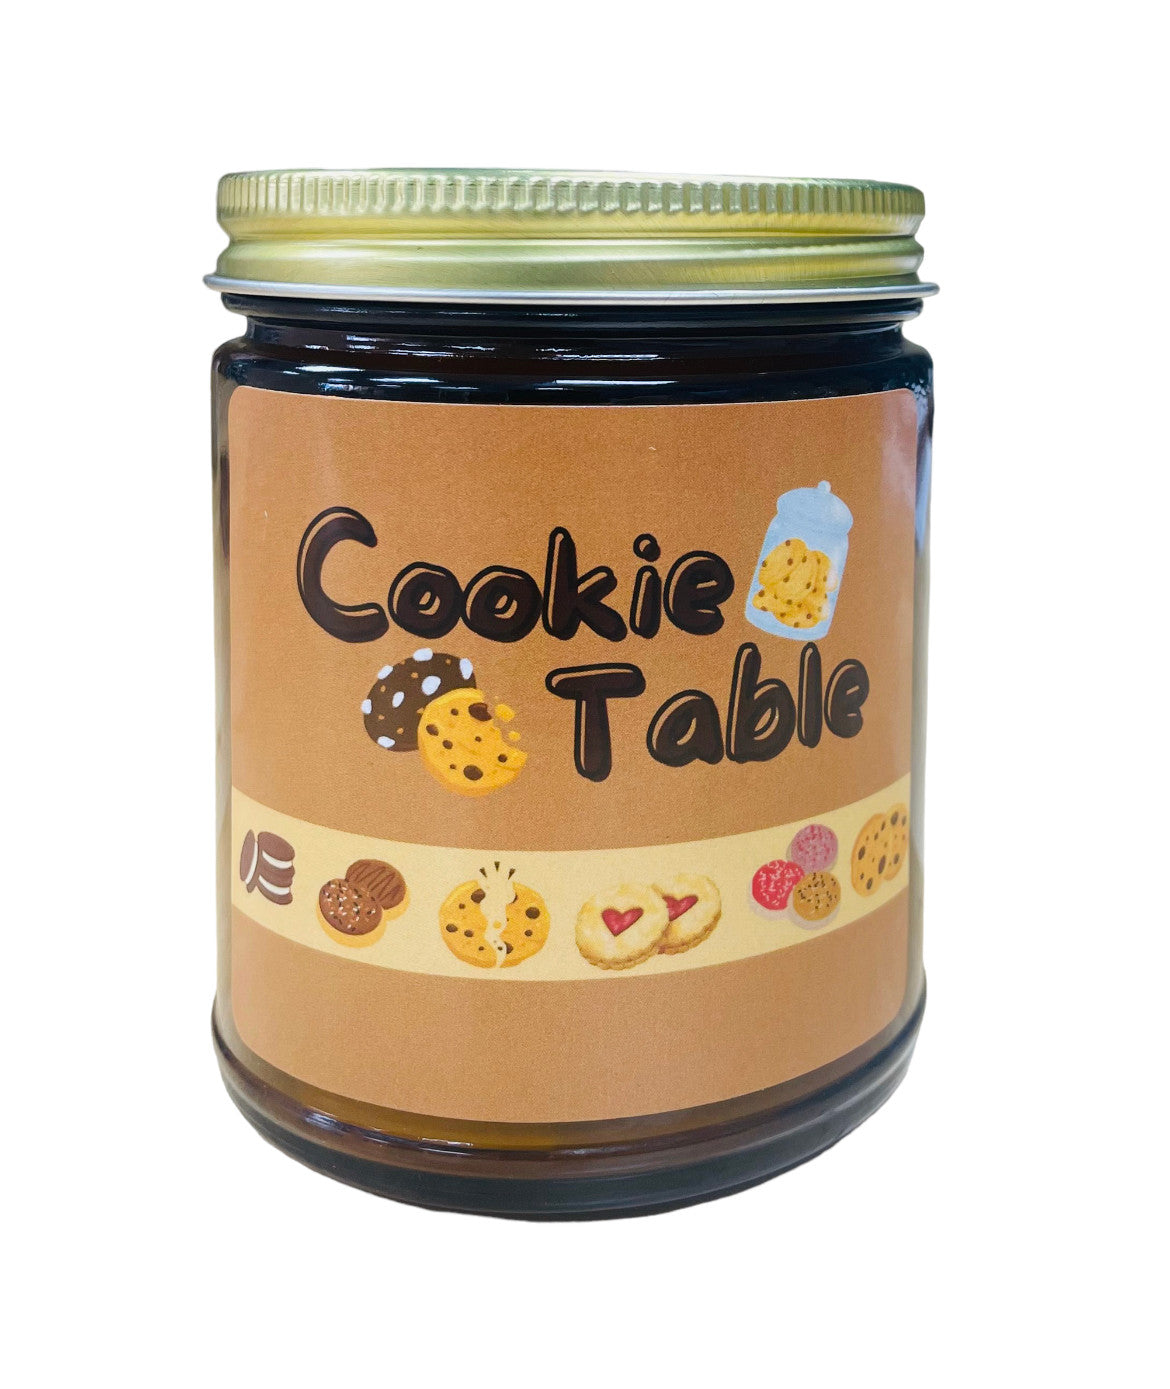 Pittsburgh Cookie Table Soy Wax Candle with oven baked scents